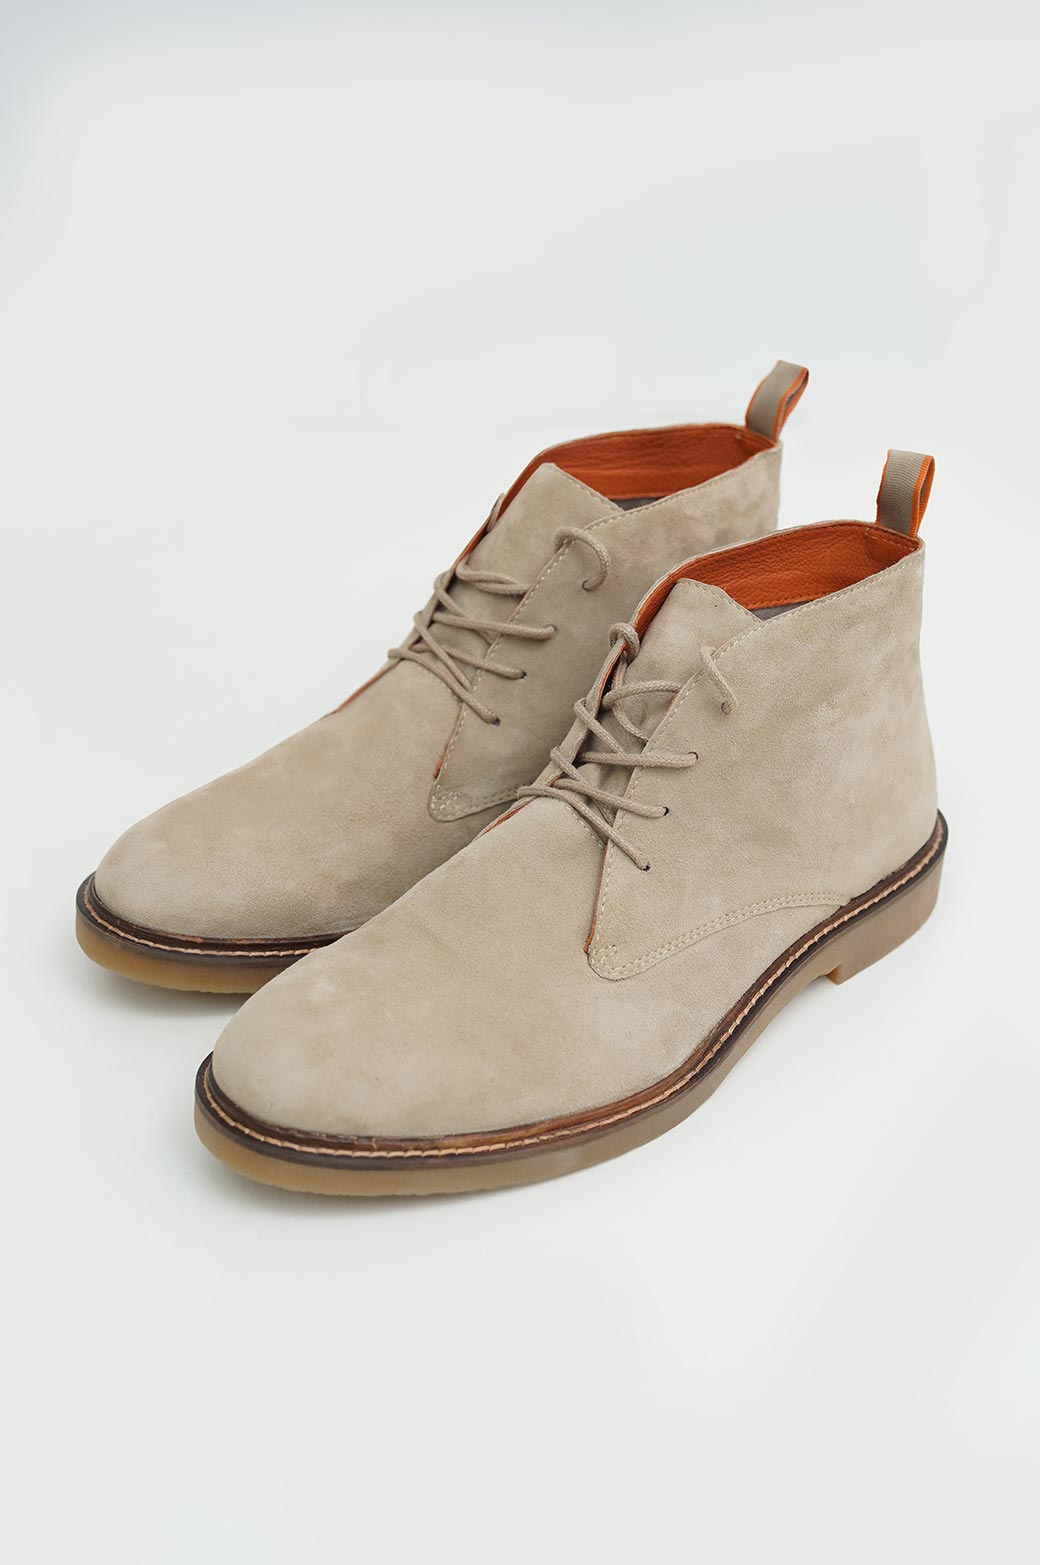 SAND SUEDE CHUKKA BOOTS